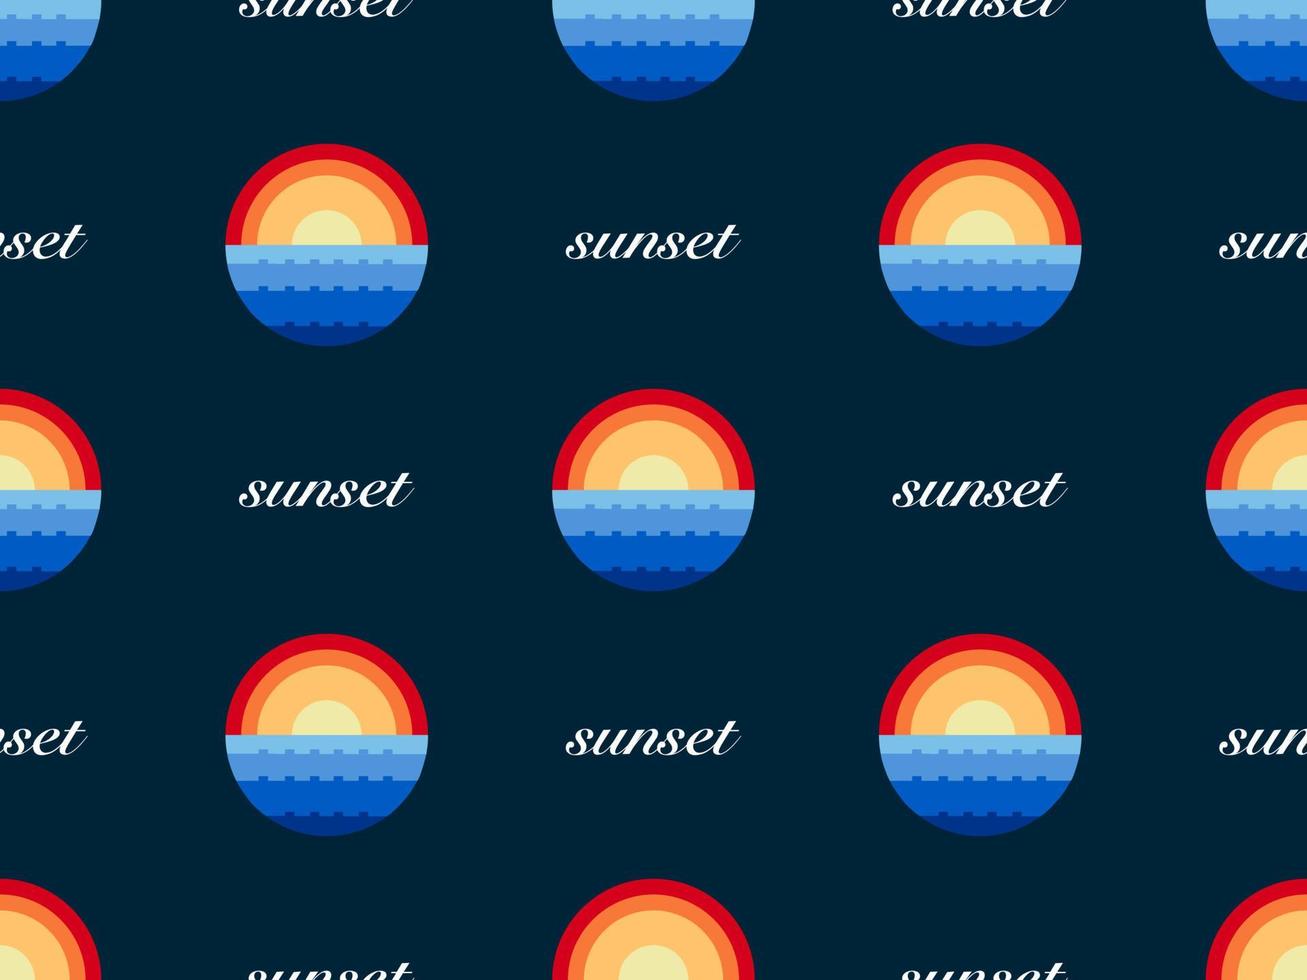 Sunset cartoon character seamless pattern on black background.  Pixel style vector